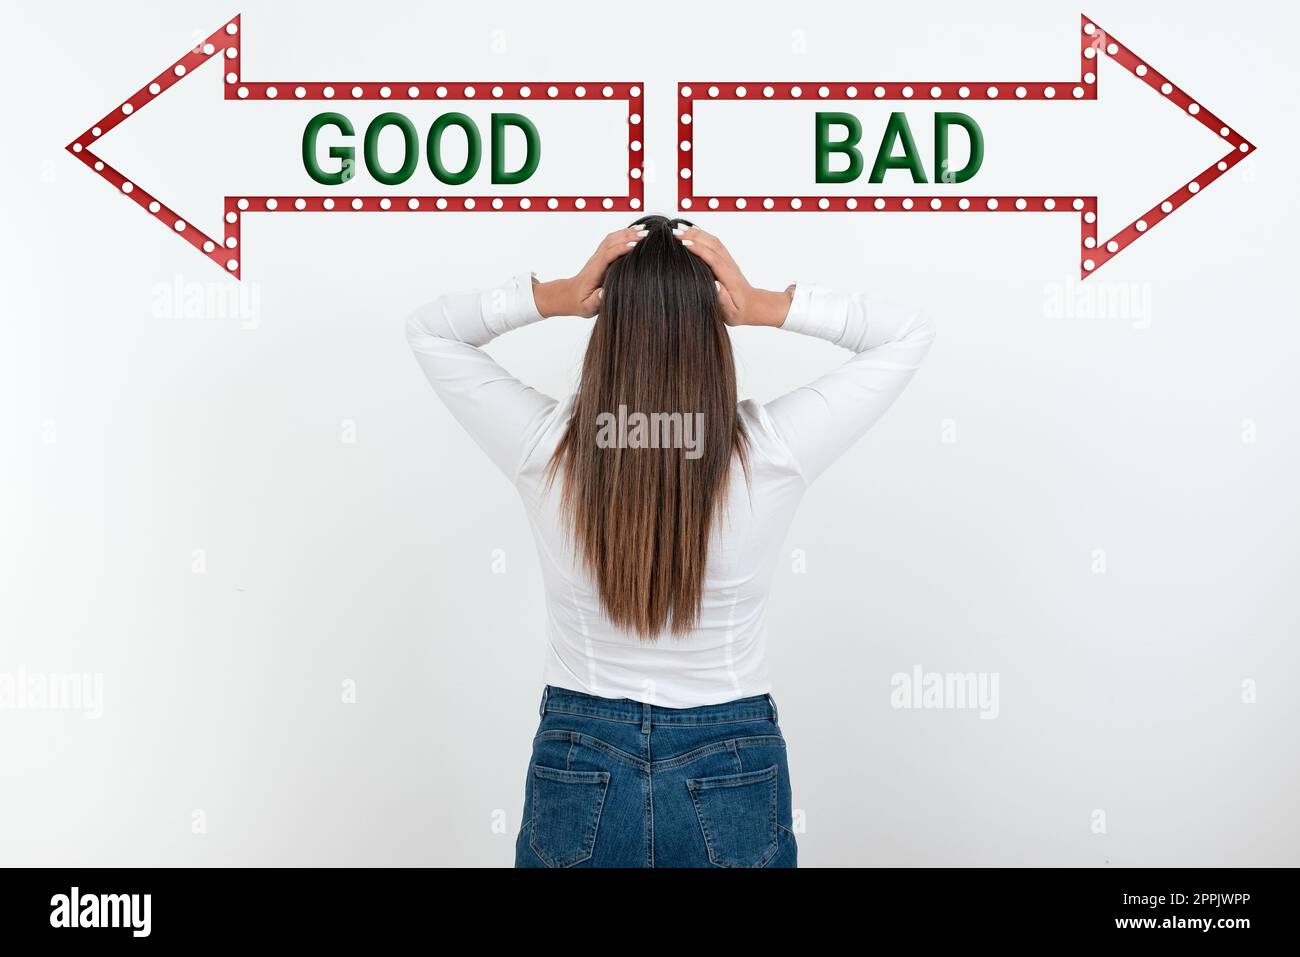 Conceptual caption Good Bad. Business idea to seem to be going to have a good or bad result Life choices Stock Photo